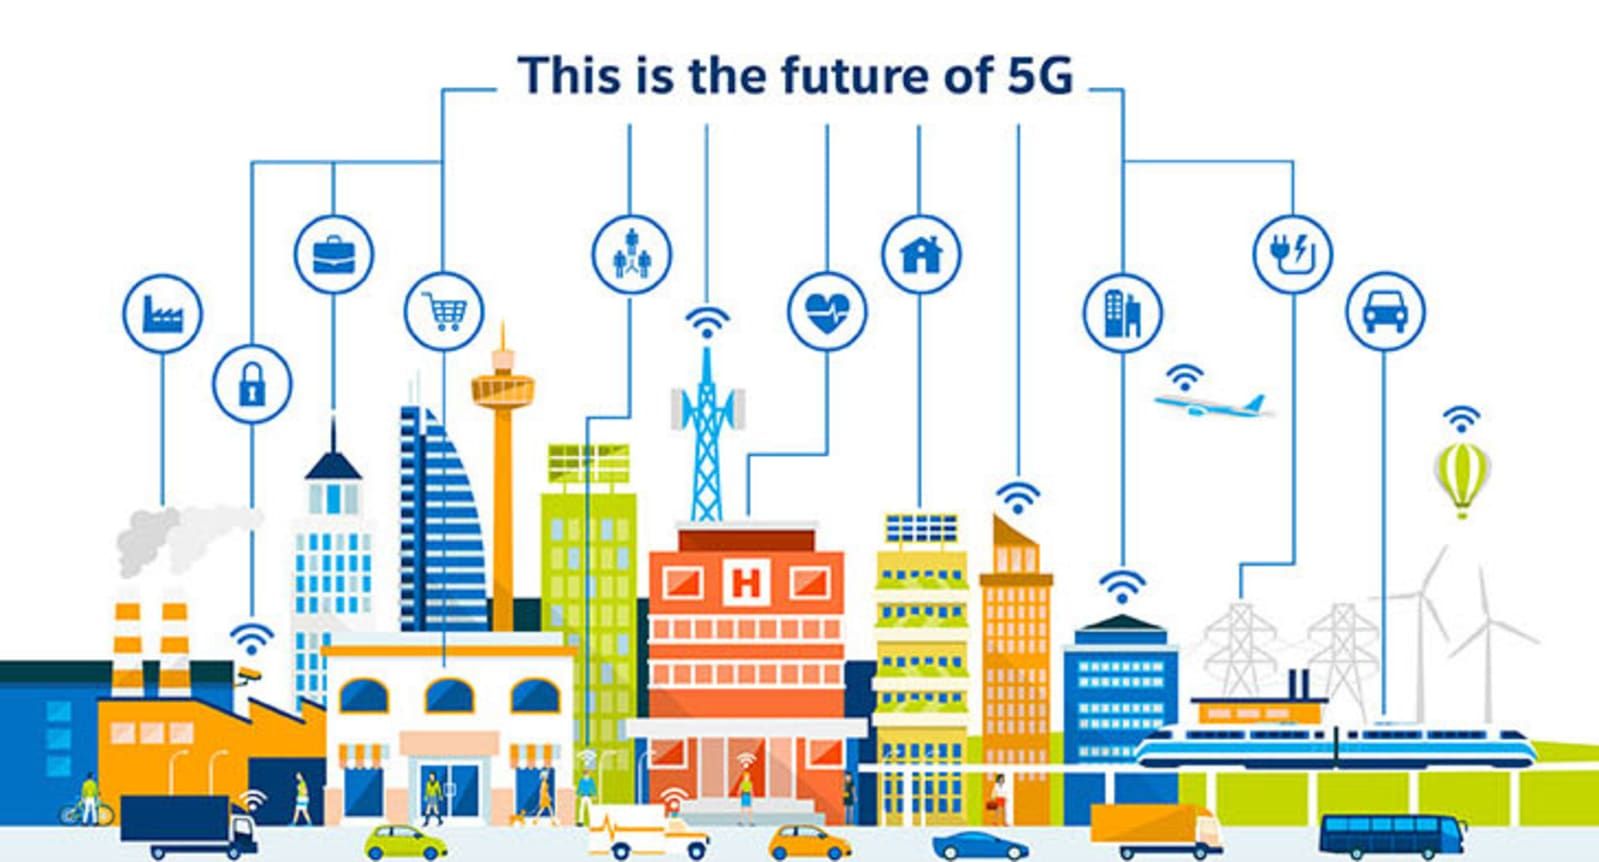 HOW 5G WILL TRANSFORM THE IOT LANDSCAPE